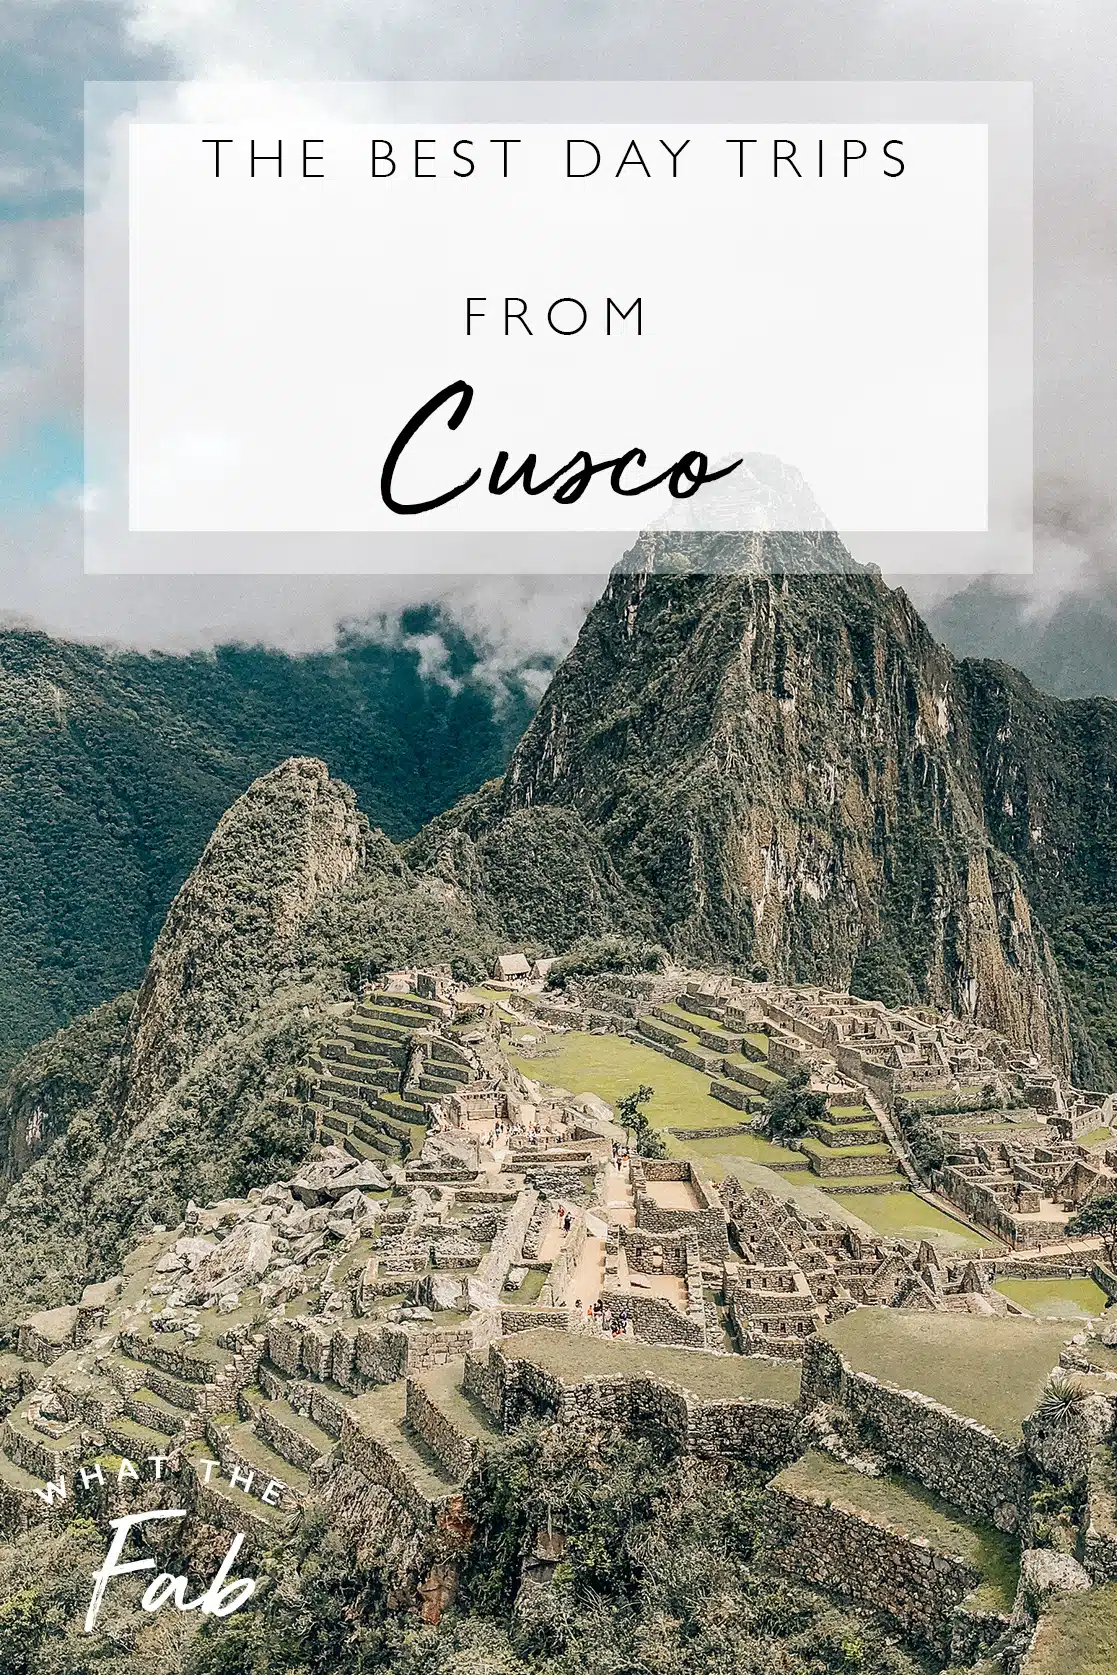 The best day trips from Cusco, by travel blogger What The Fab